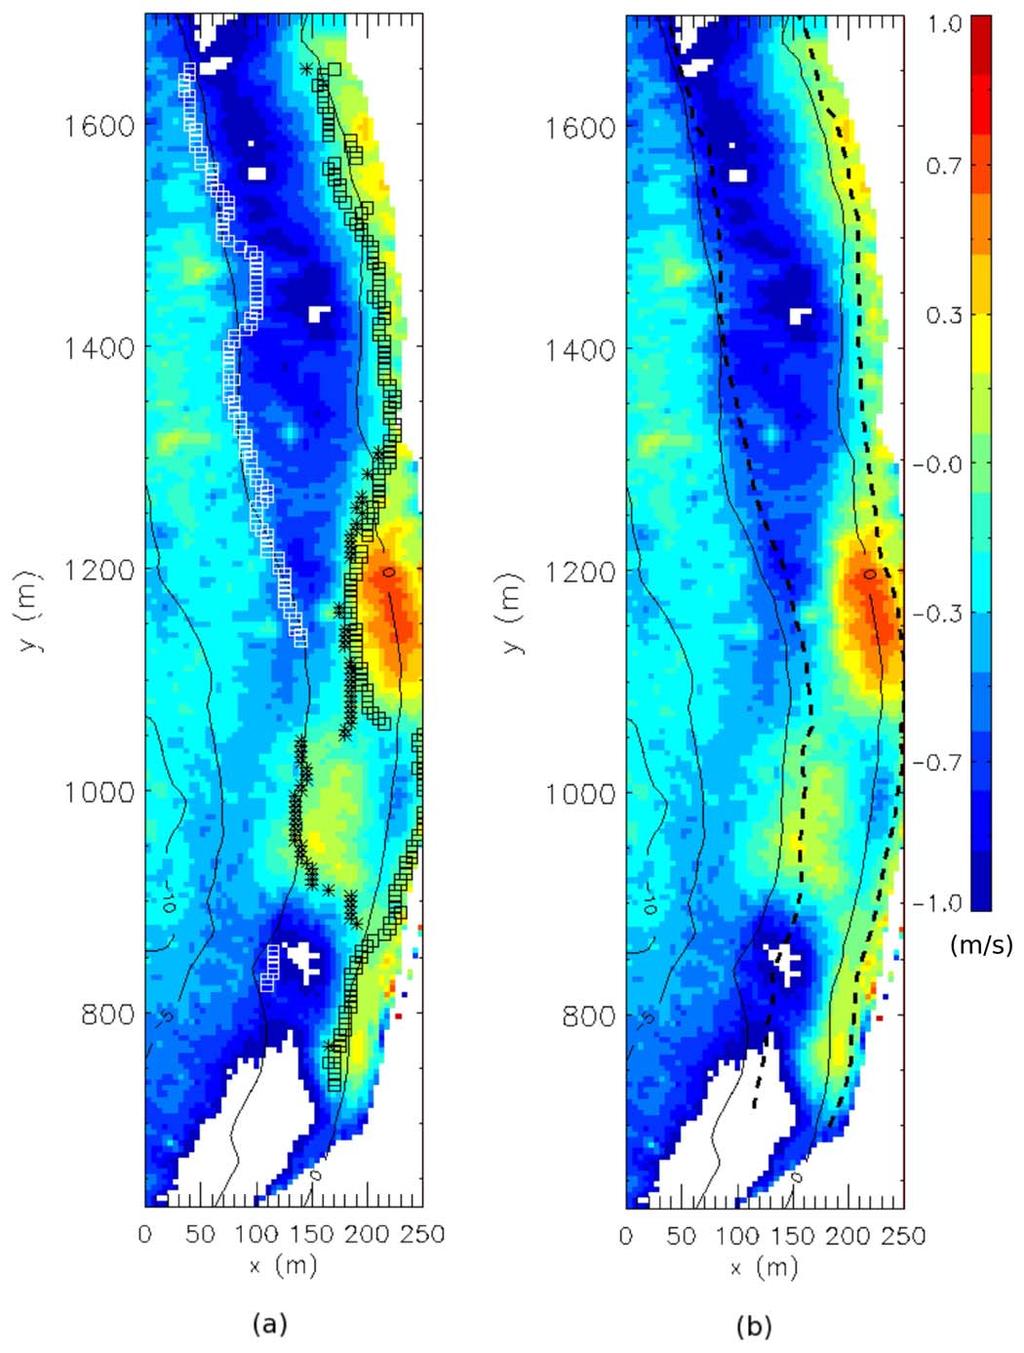 794 IEEE TRANSACTIONS ON GEOSCIENCE AND REMOTE SENSING, VOL. 47, NO. 8, AUGUST 009 Fig. 9. Cross-shore transect of Doppler and PIV velocities at 1140 m alongshore.